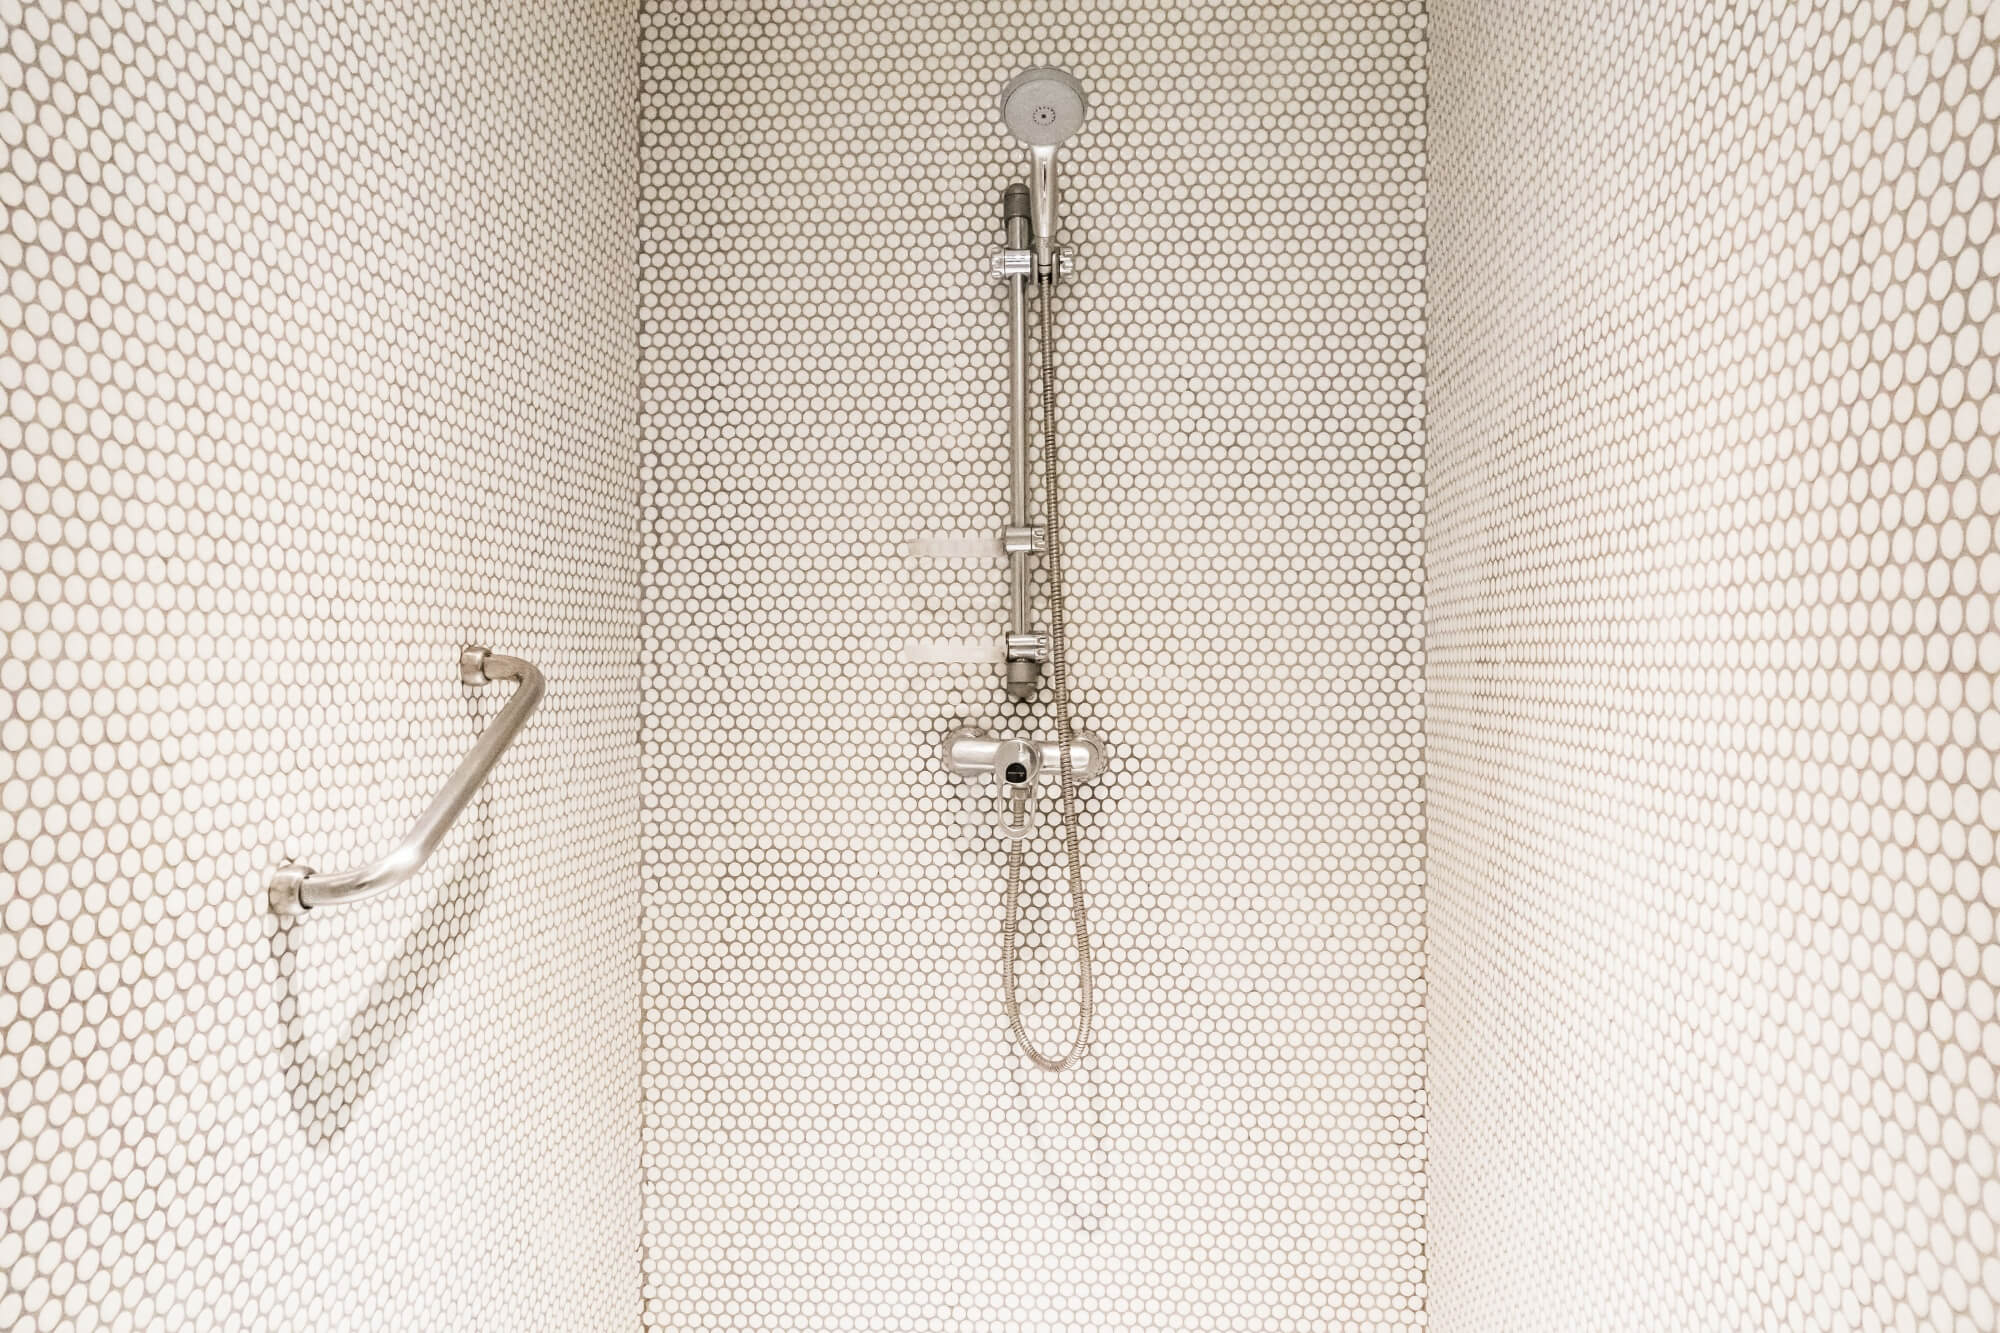 Shower Conversions - Carolina Home Remodeling Specialists